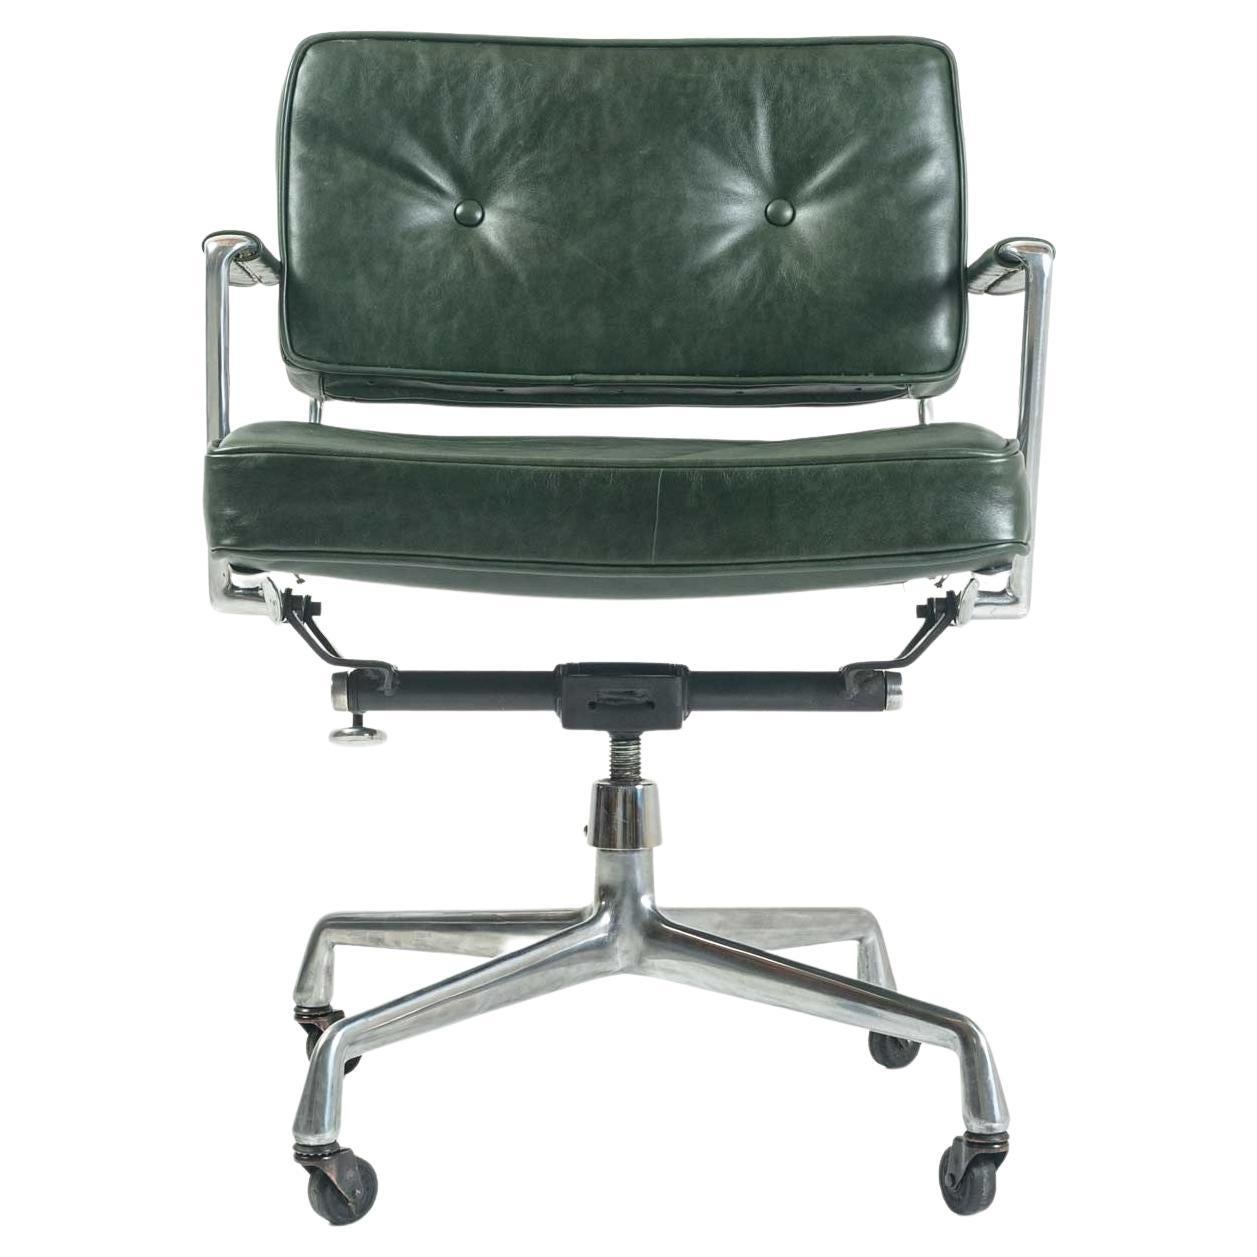 Eames for Herman Miller Intermediate Chair in British Racing Green Leather